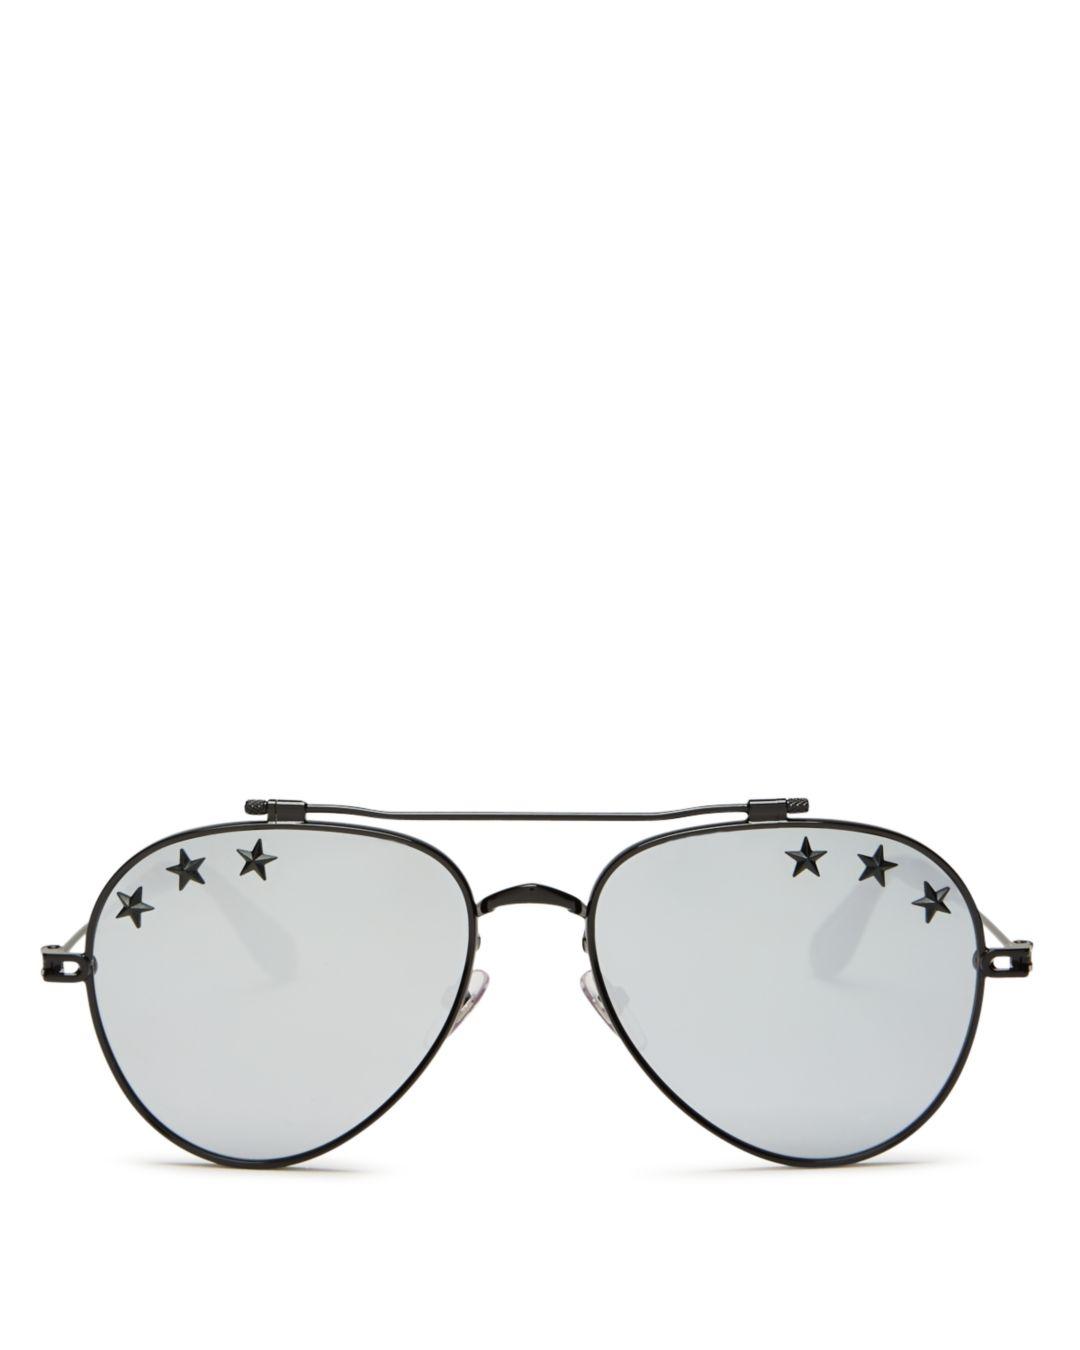 Givenchy Women S Embellished Brow Bar Aviator Sunglasses In Metallic Lyst